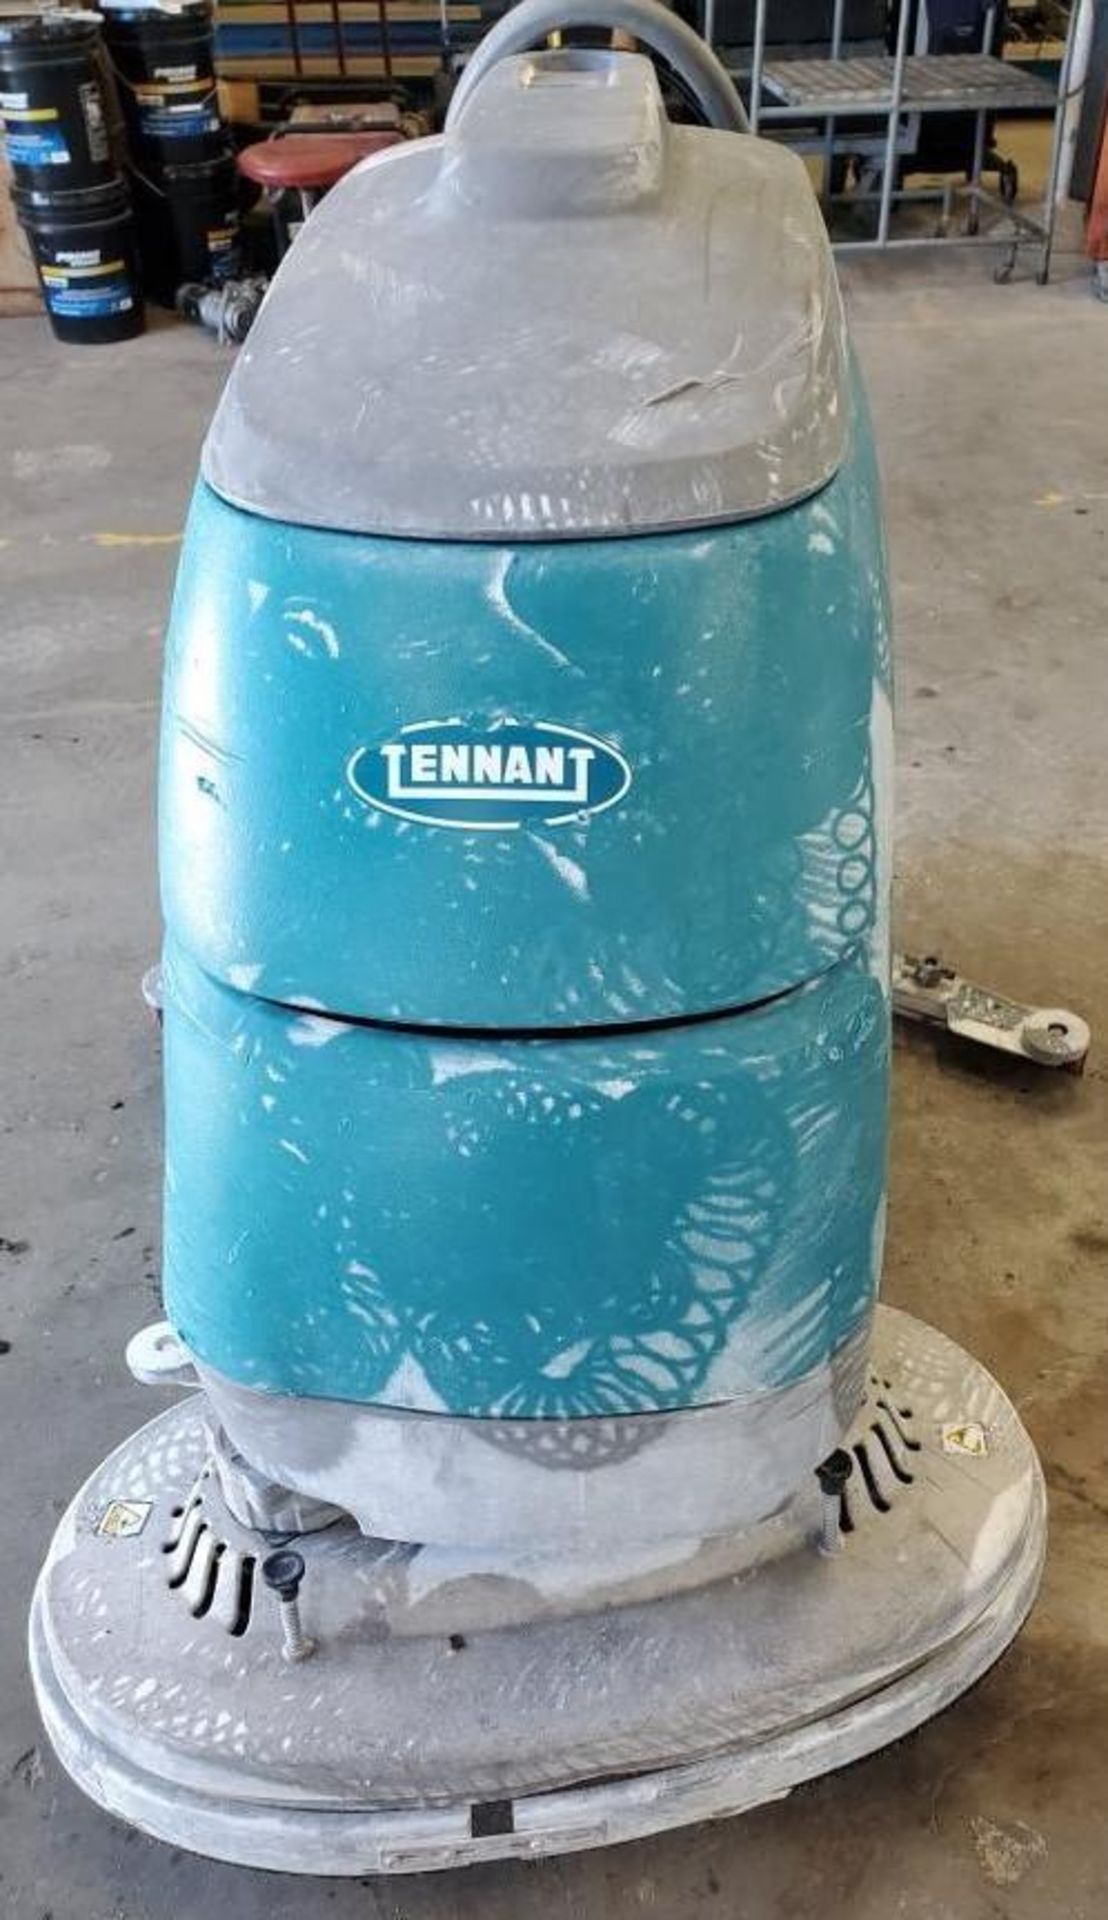 Tennant #T5 Floor Scrubber - Image 2 of 7